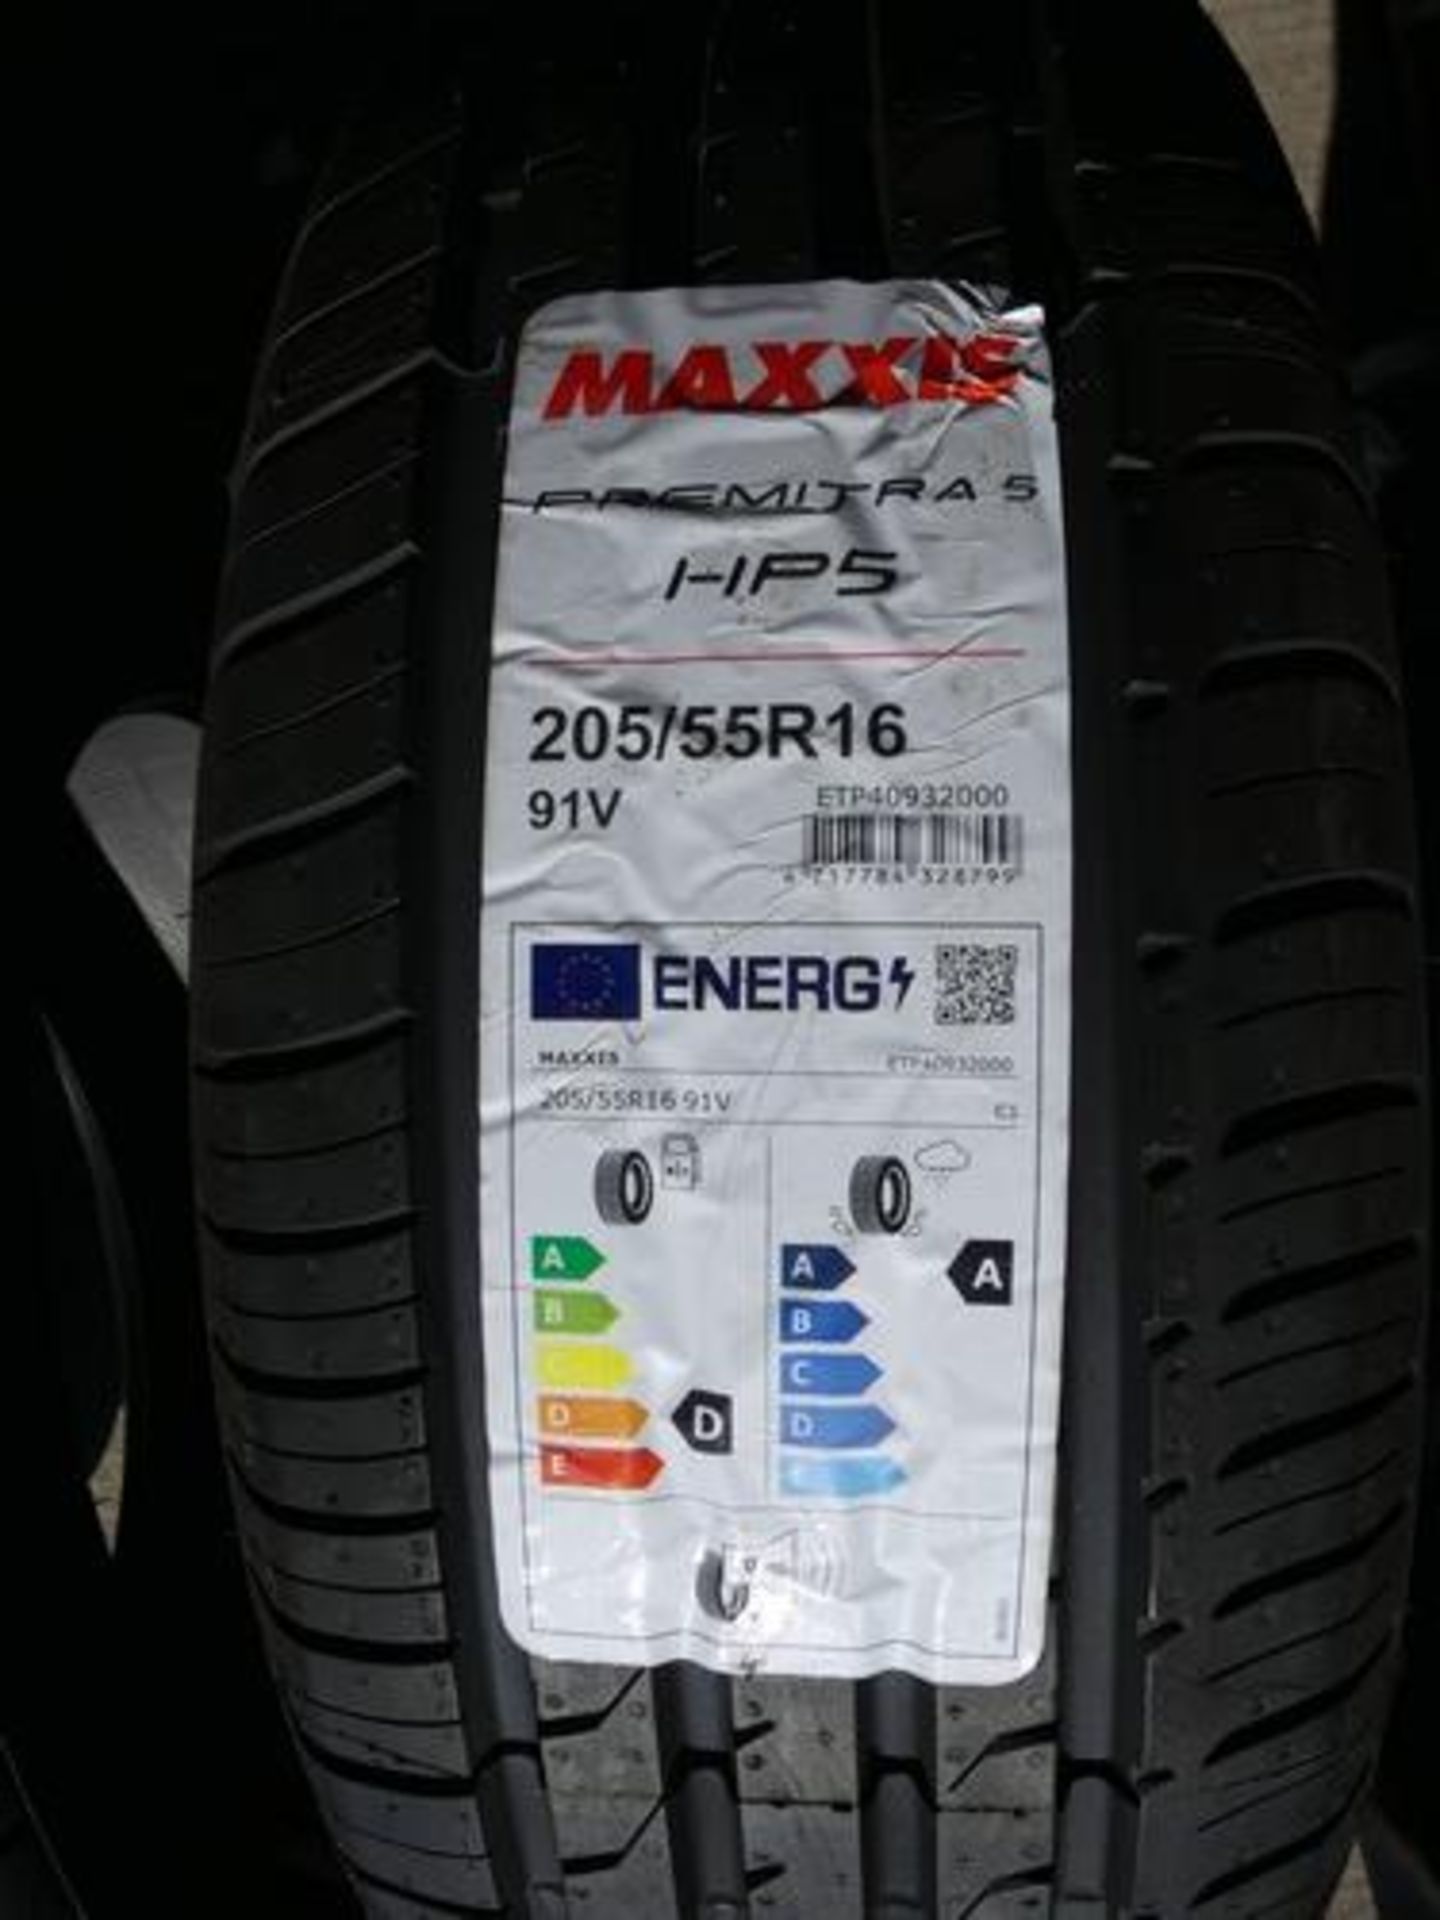 1 x Maxxis Premitra HP5 tyre, size 205/55R16 91V - New with label (pallet 5)